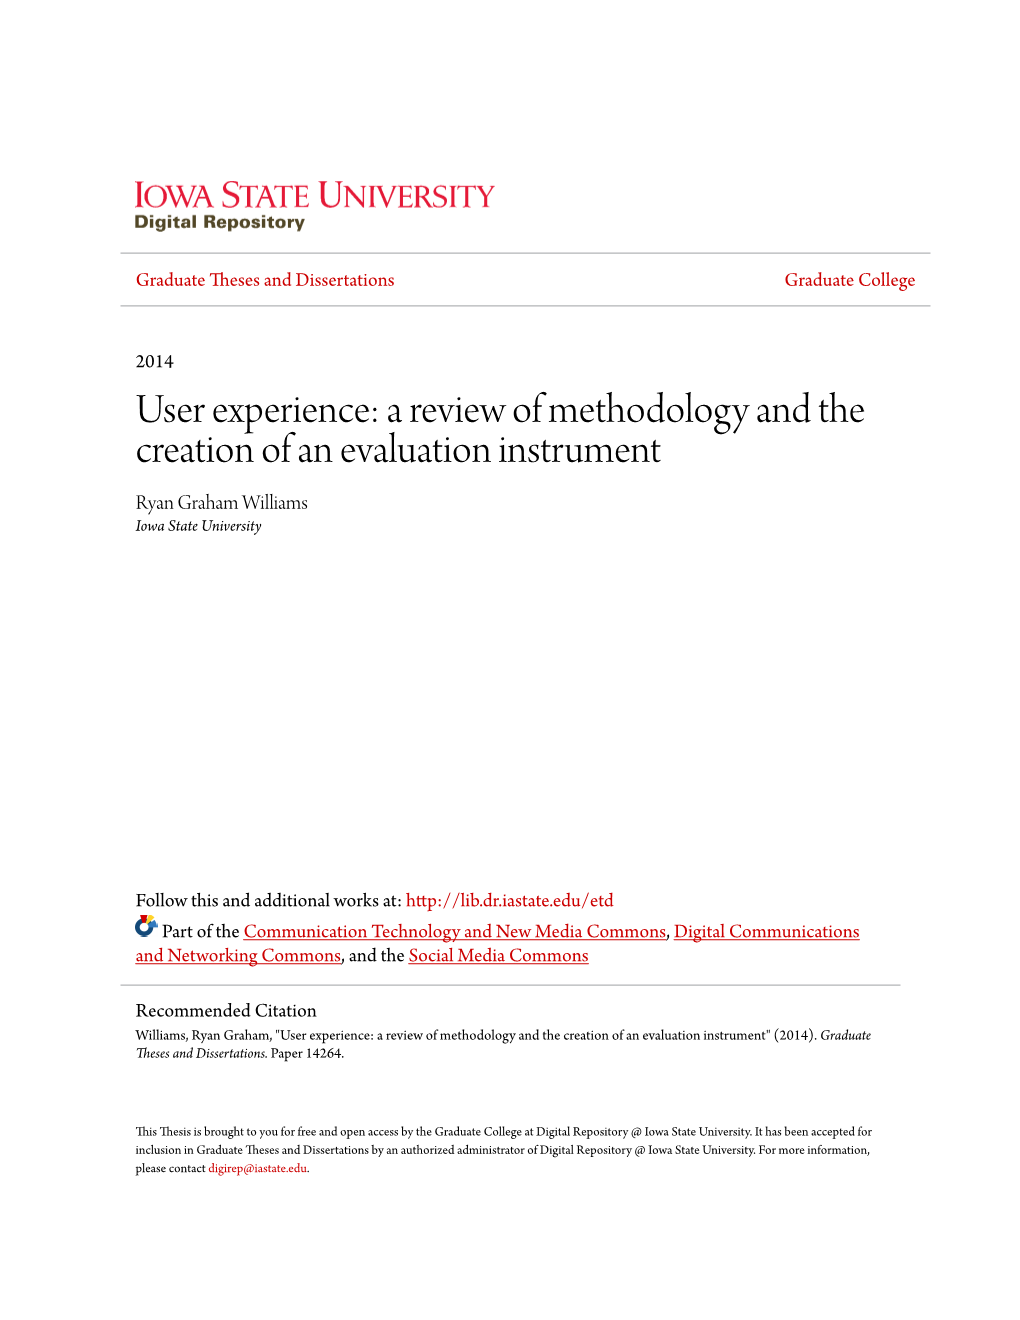 User Experience: a Review of Methodology and the Creation of an Evaluation Instrument Ryan Graham Williams Iowa State University